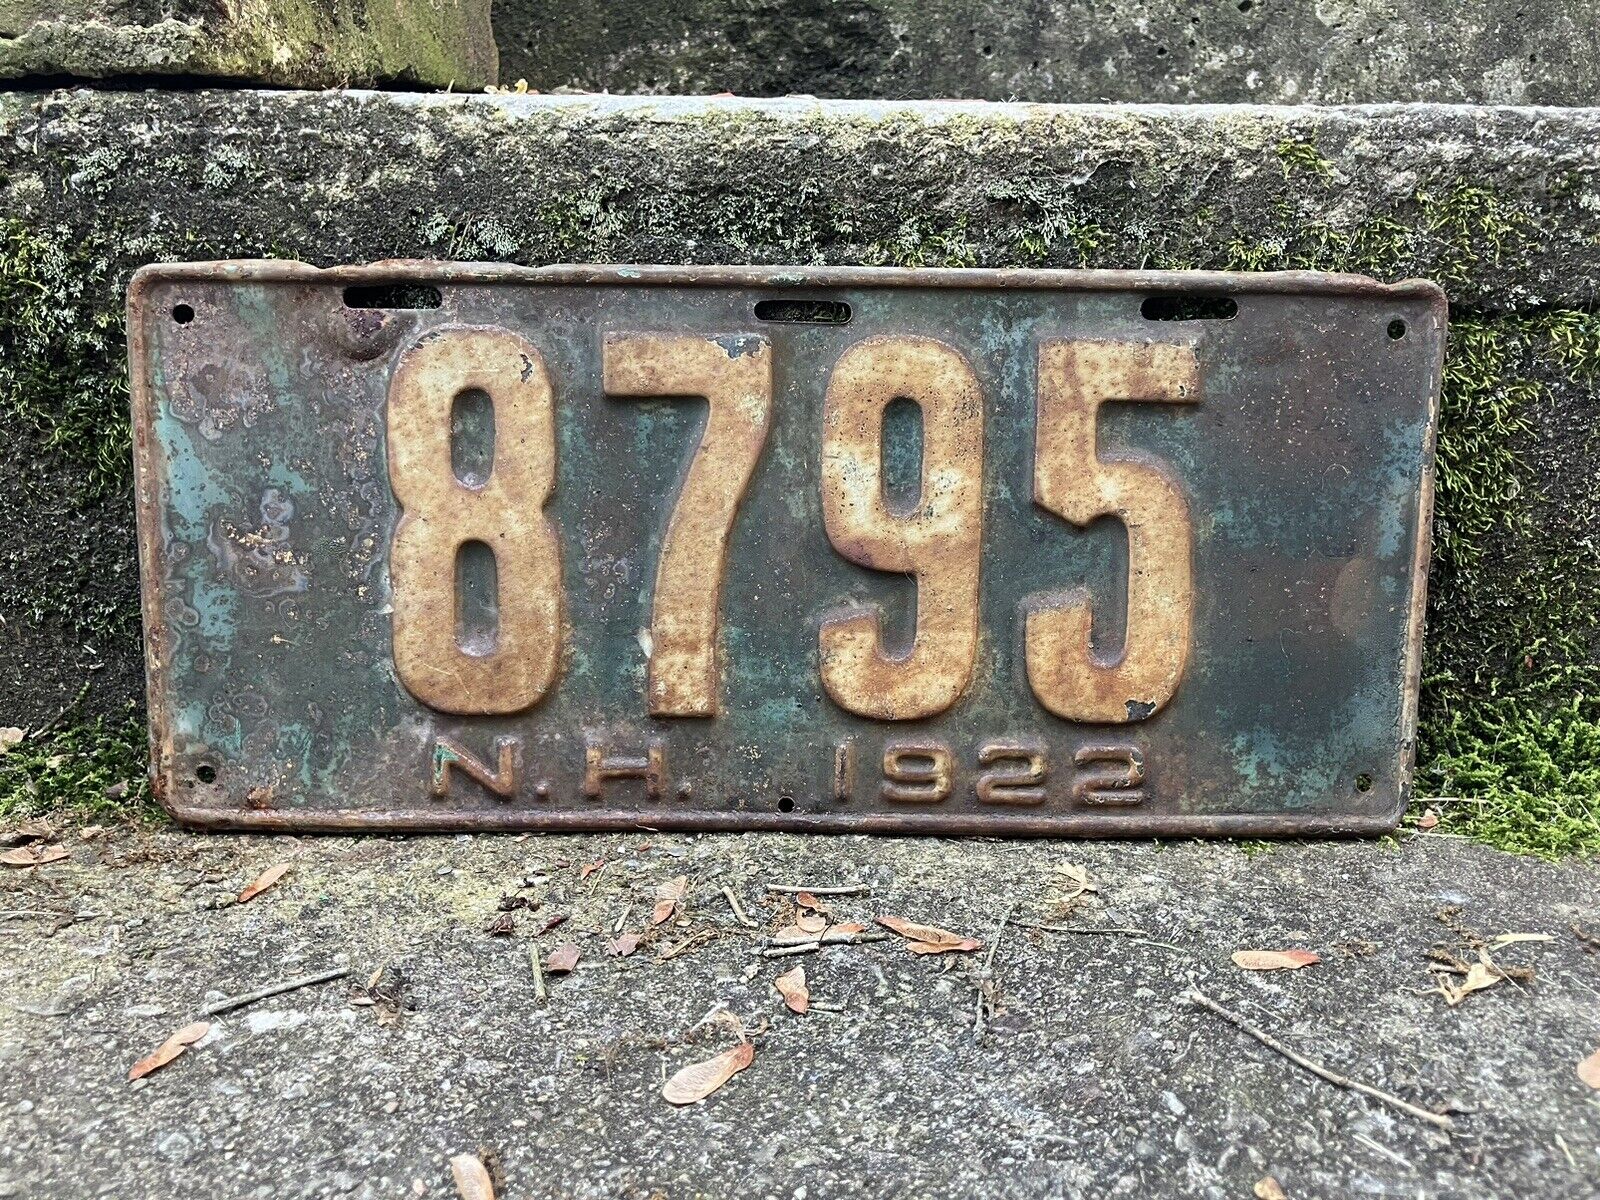 Authentic 1922 New Hampshire License Plate Metal Vintage License Plate Auto Tag